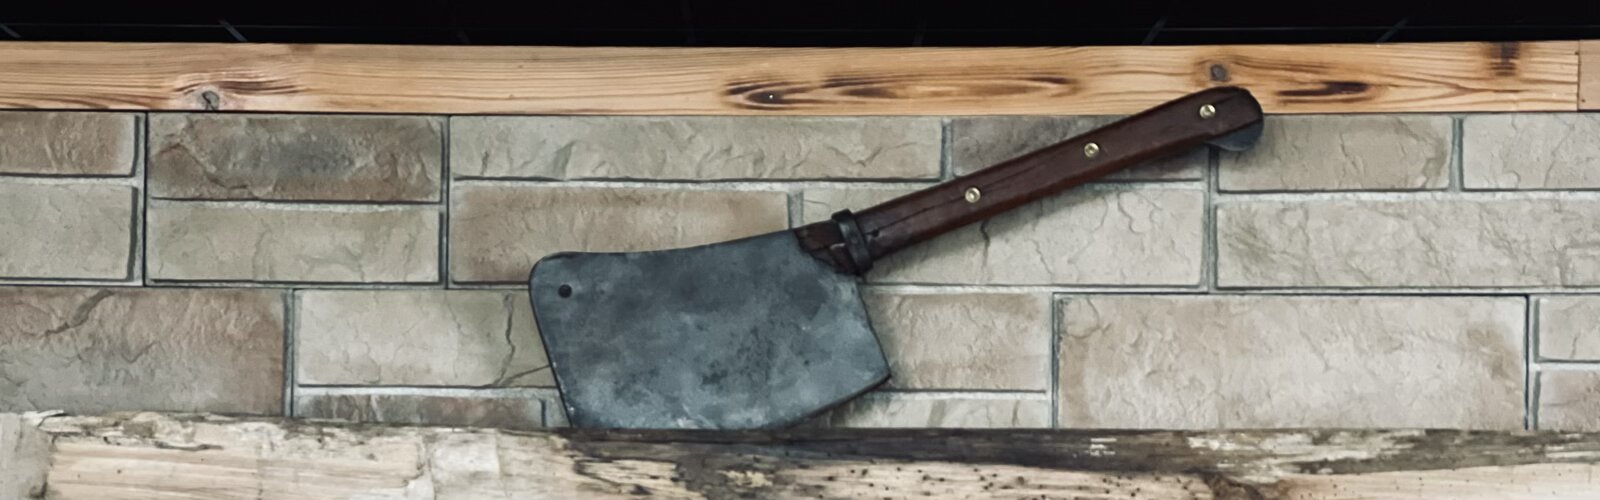 Wood Shop Social's entryway is appropriately adorned with a large axe.